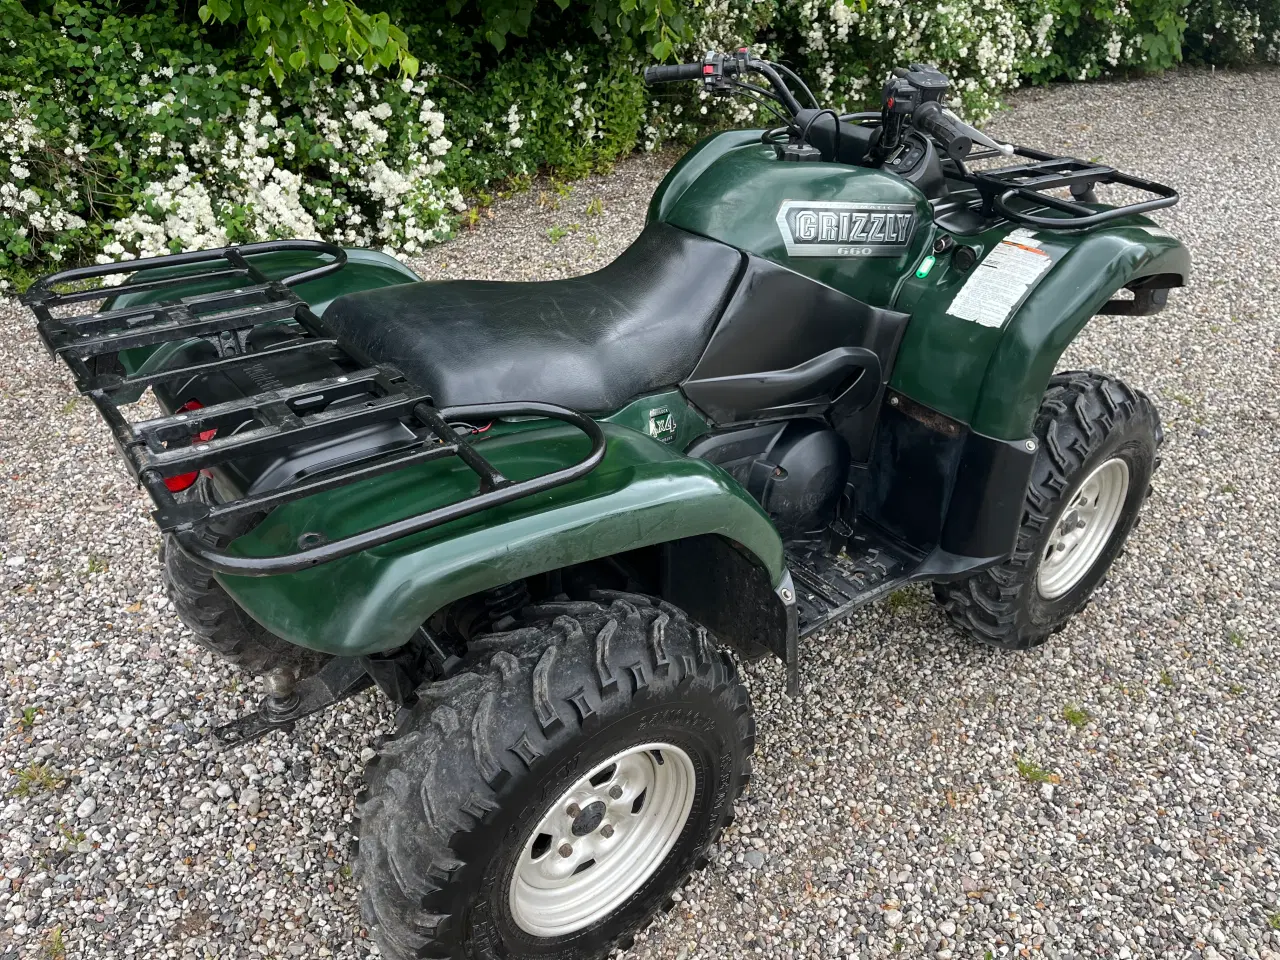 Billede 3 - Yamaha Grizzly 660